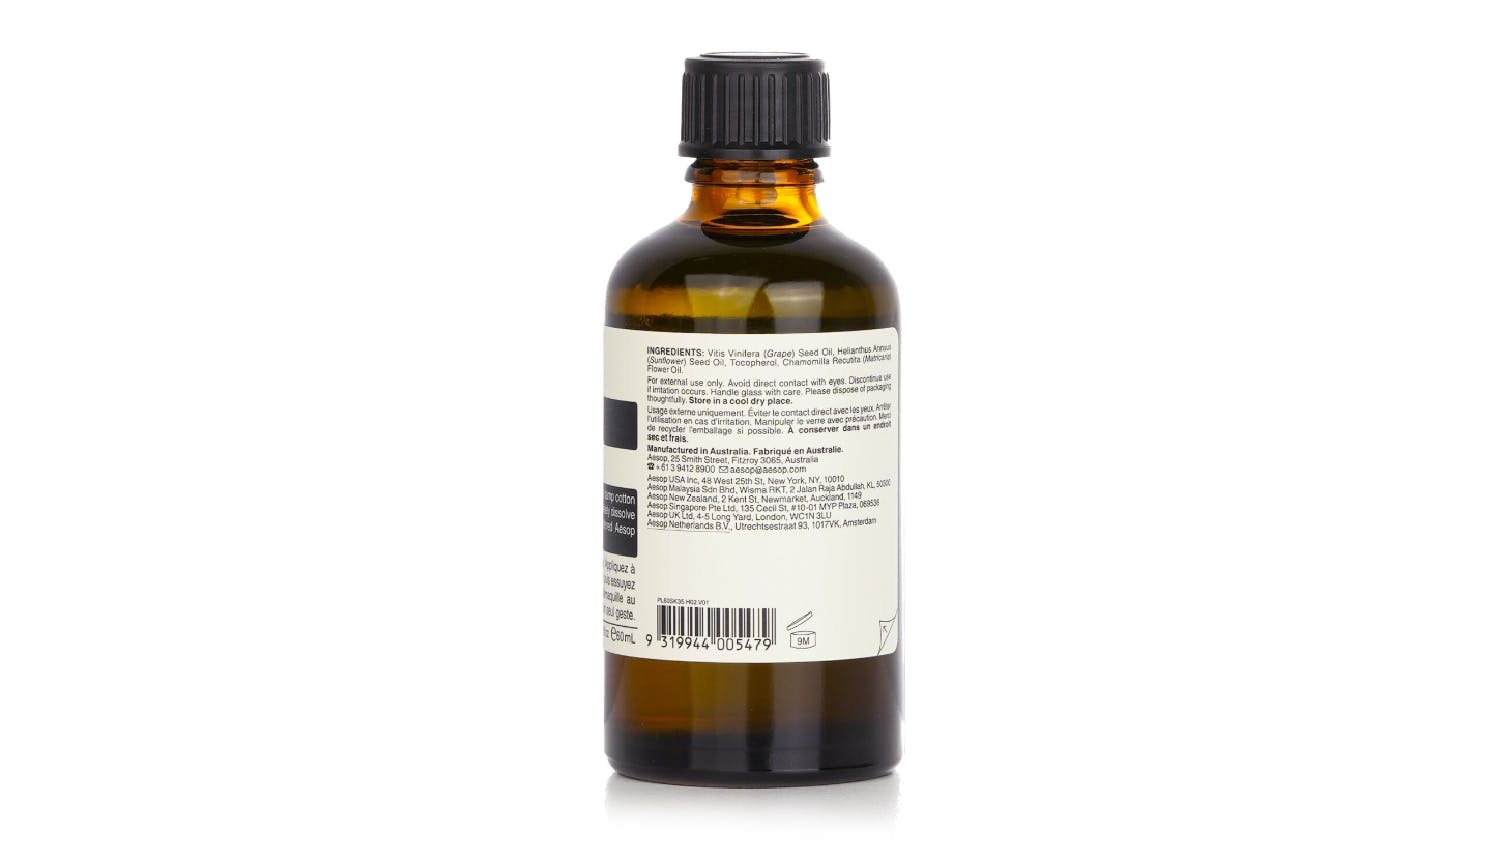 Aesop Remove Gentle Eye Makeup Remover (For All Skin Types) - 60ml/2oz